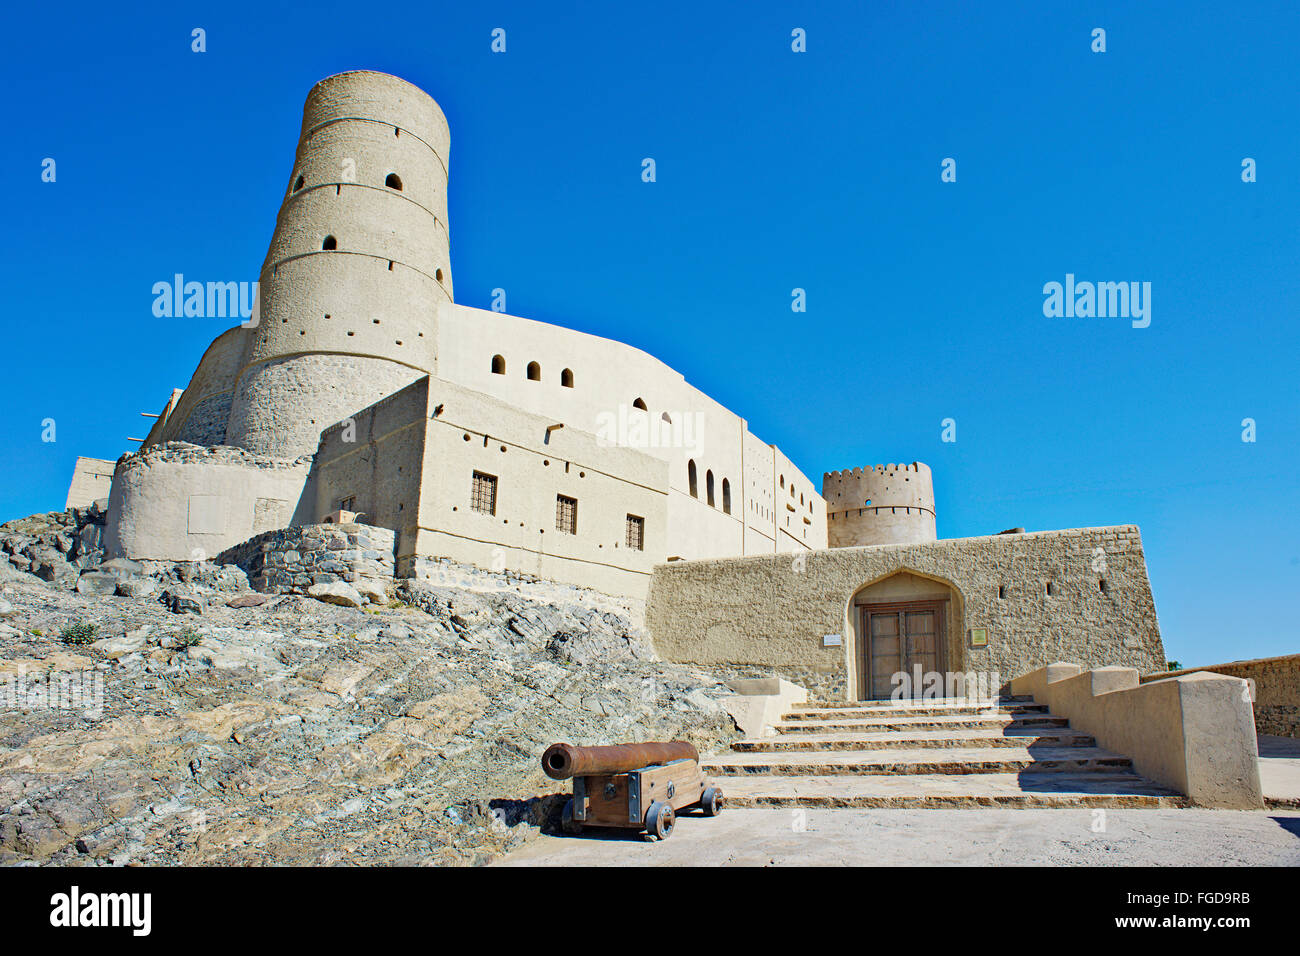 Bahla Fort, one of the historical tourist sites in Oman. Stock Photo